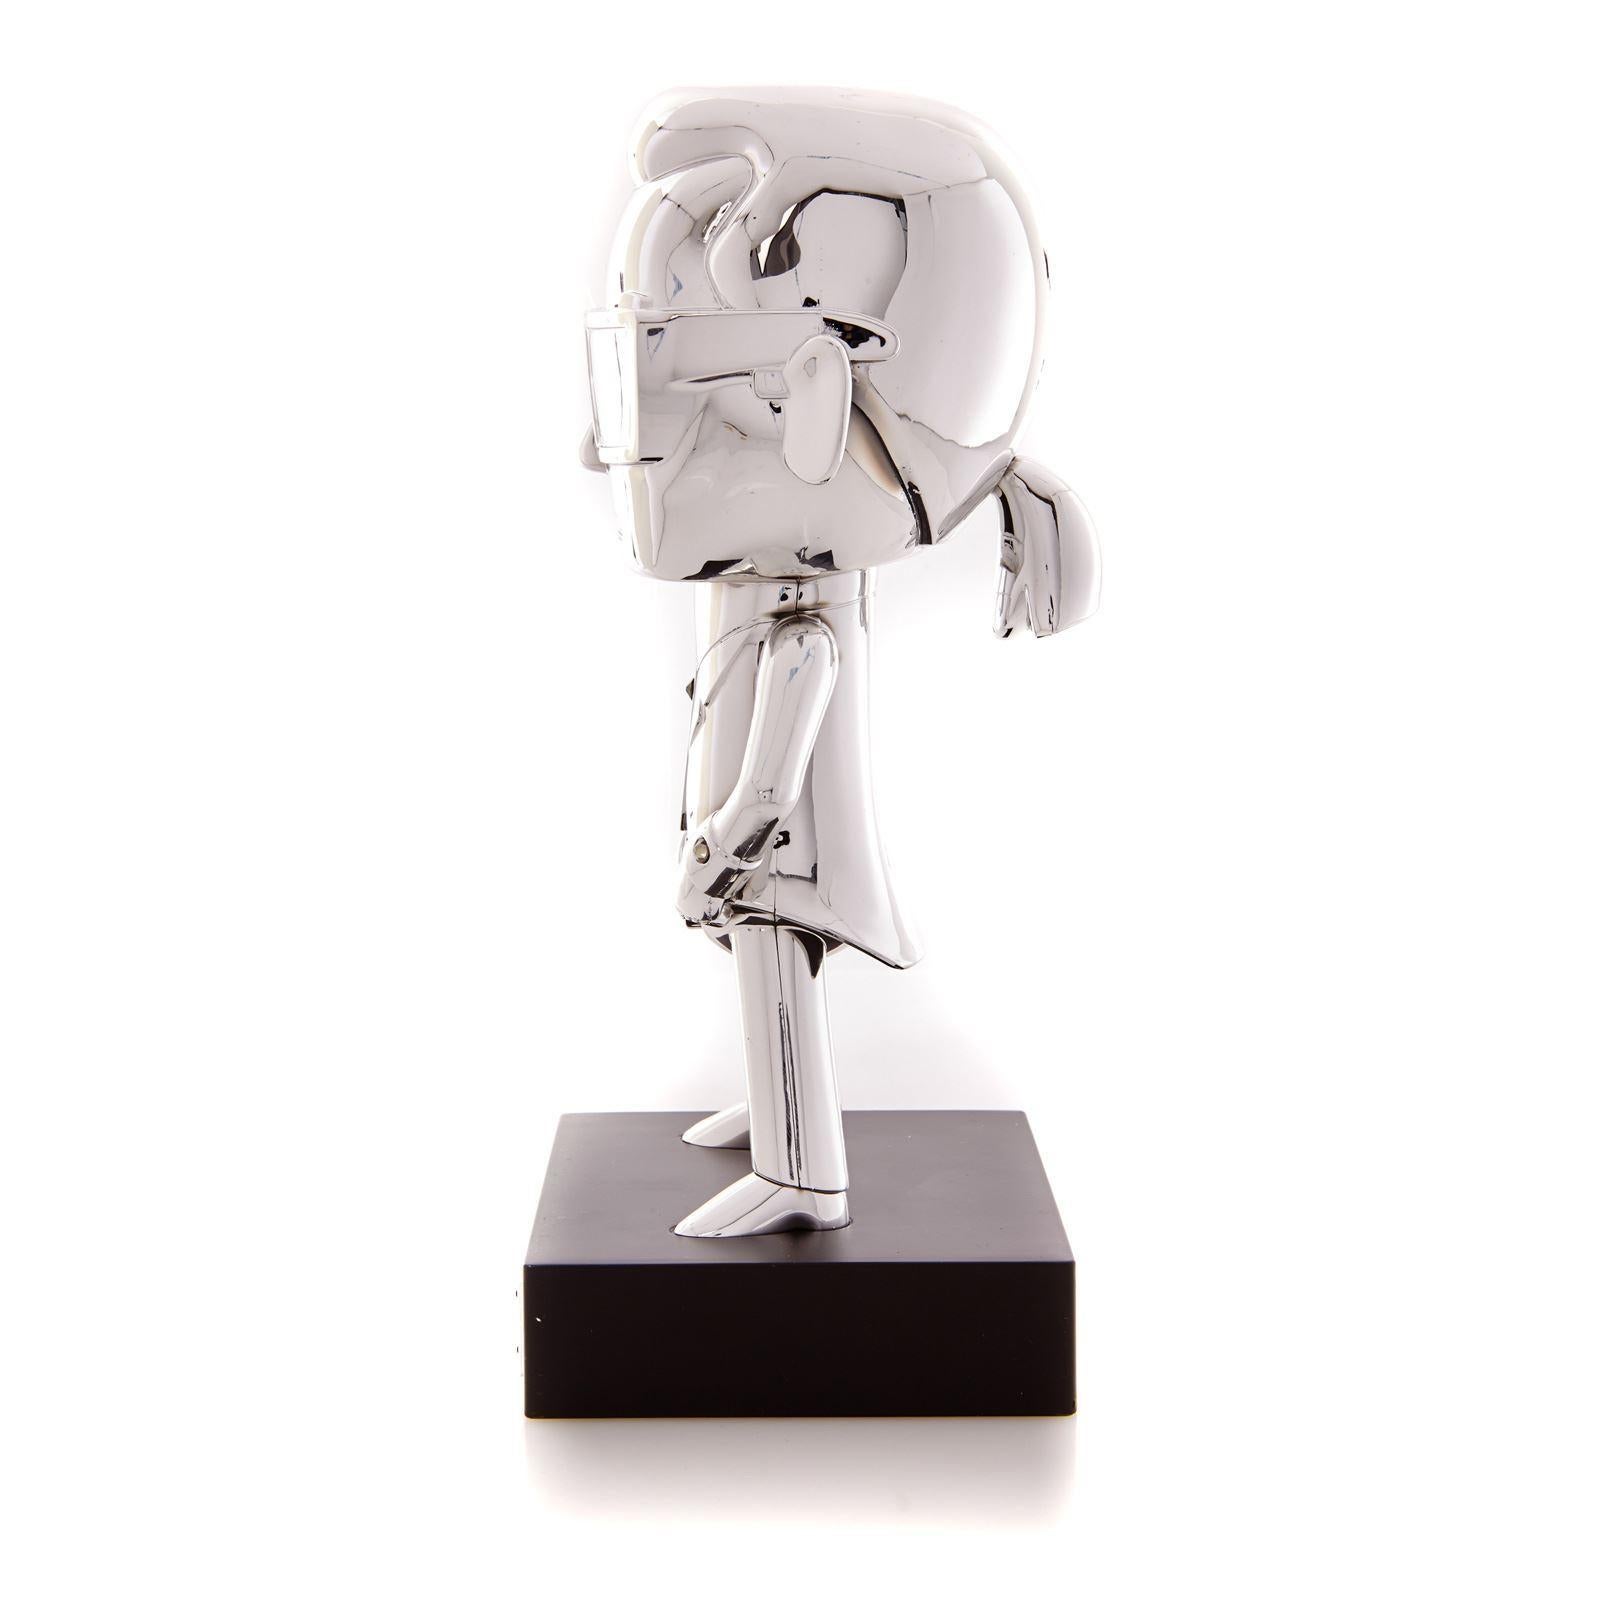 Mr Chrome Figurine Karl Lagerfeld x Tokidoki Limited Edition. Creation of Simone Legno. Made of brilliant chrome. 

Dimensions: L 11.5 x H 25 cm

It has been manufactured to 1300 copies. Delivered with its certificate of authenticity.

Will be